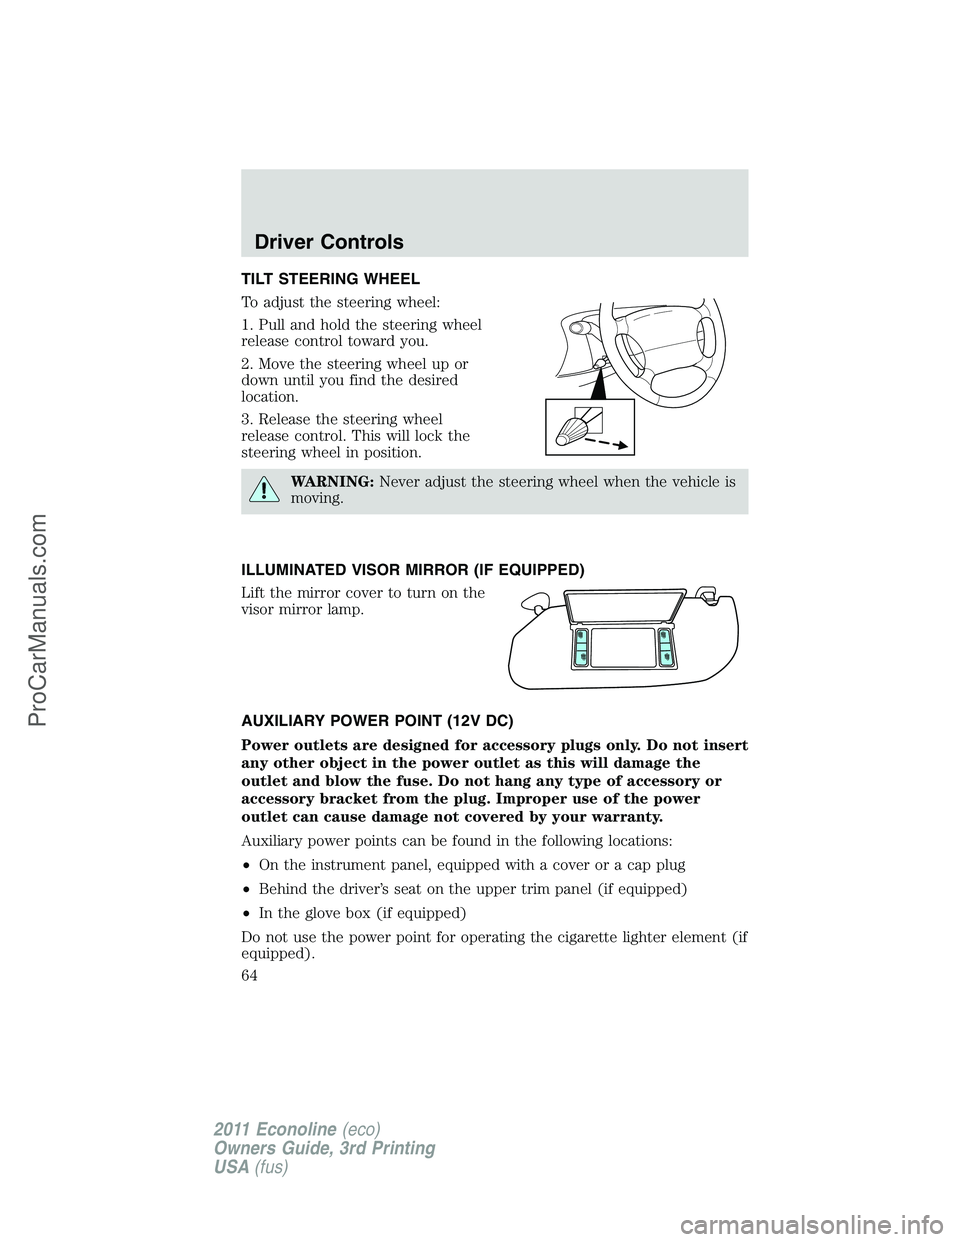 FORD E-450 2011  Owners Manual TILT STEERING WHEEL
To adjust the steering wheel:
1. Pull and hold the steering wheel
release control toward you.
2. Move the steering wheel up or
down until you find the desired
location.
3. Release 